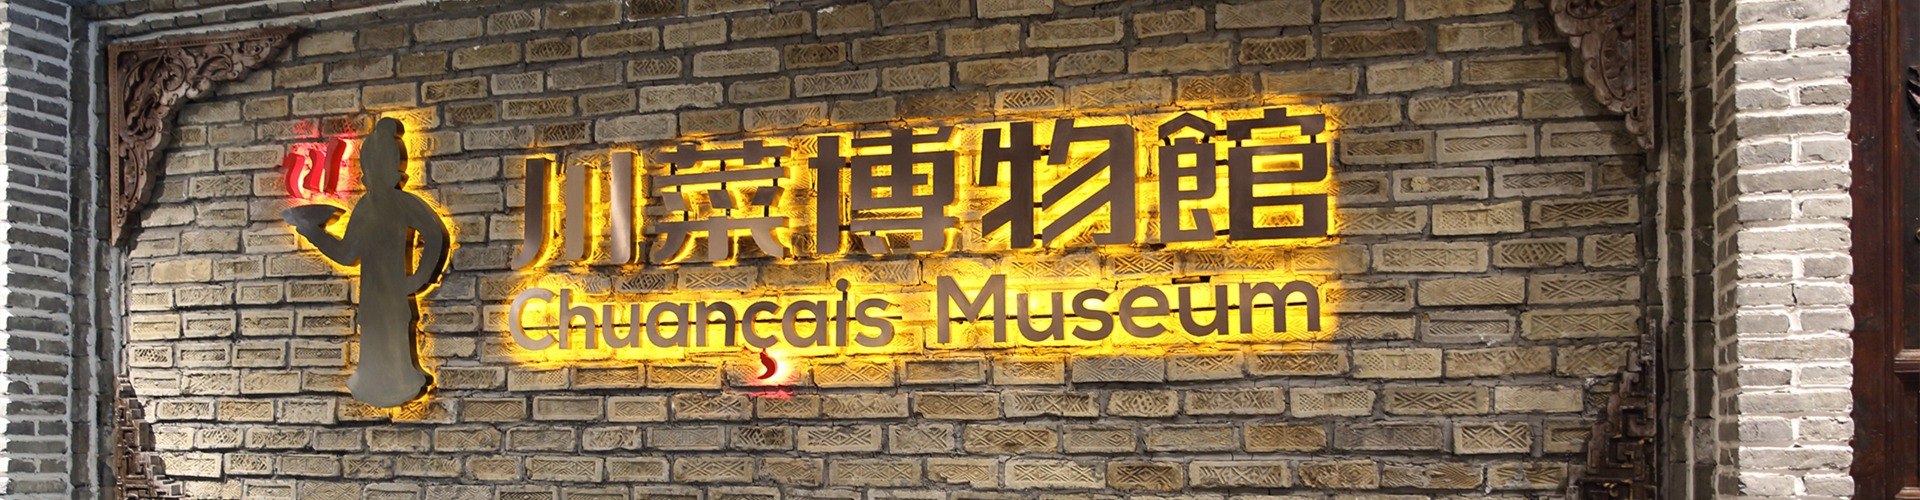 Sichuan Cuisine Museum: Have Fun with Chuancais in Chengdu - Trippest's Chengdu Travel Guide